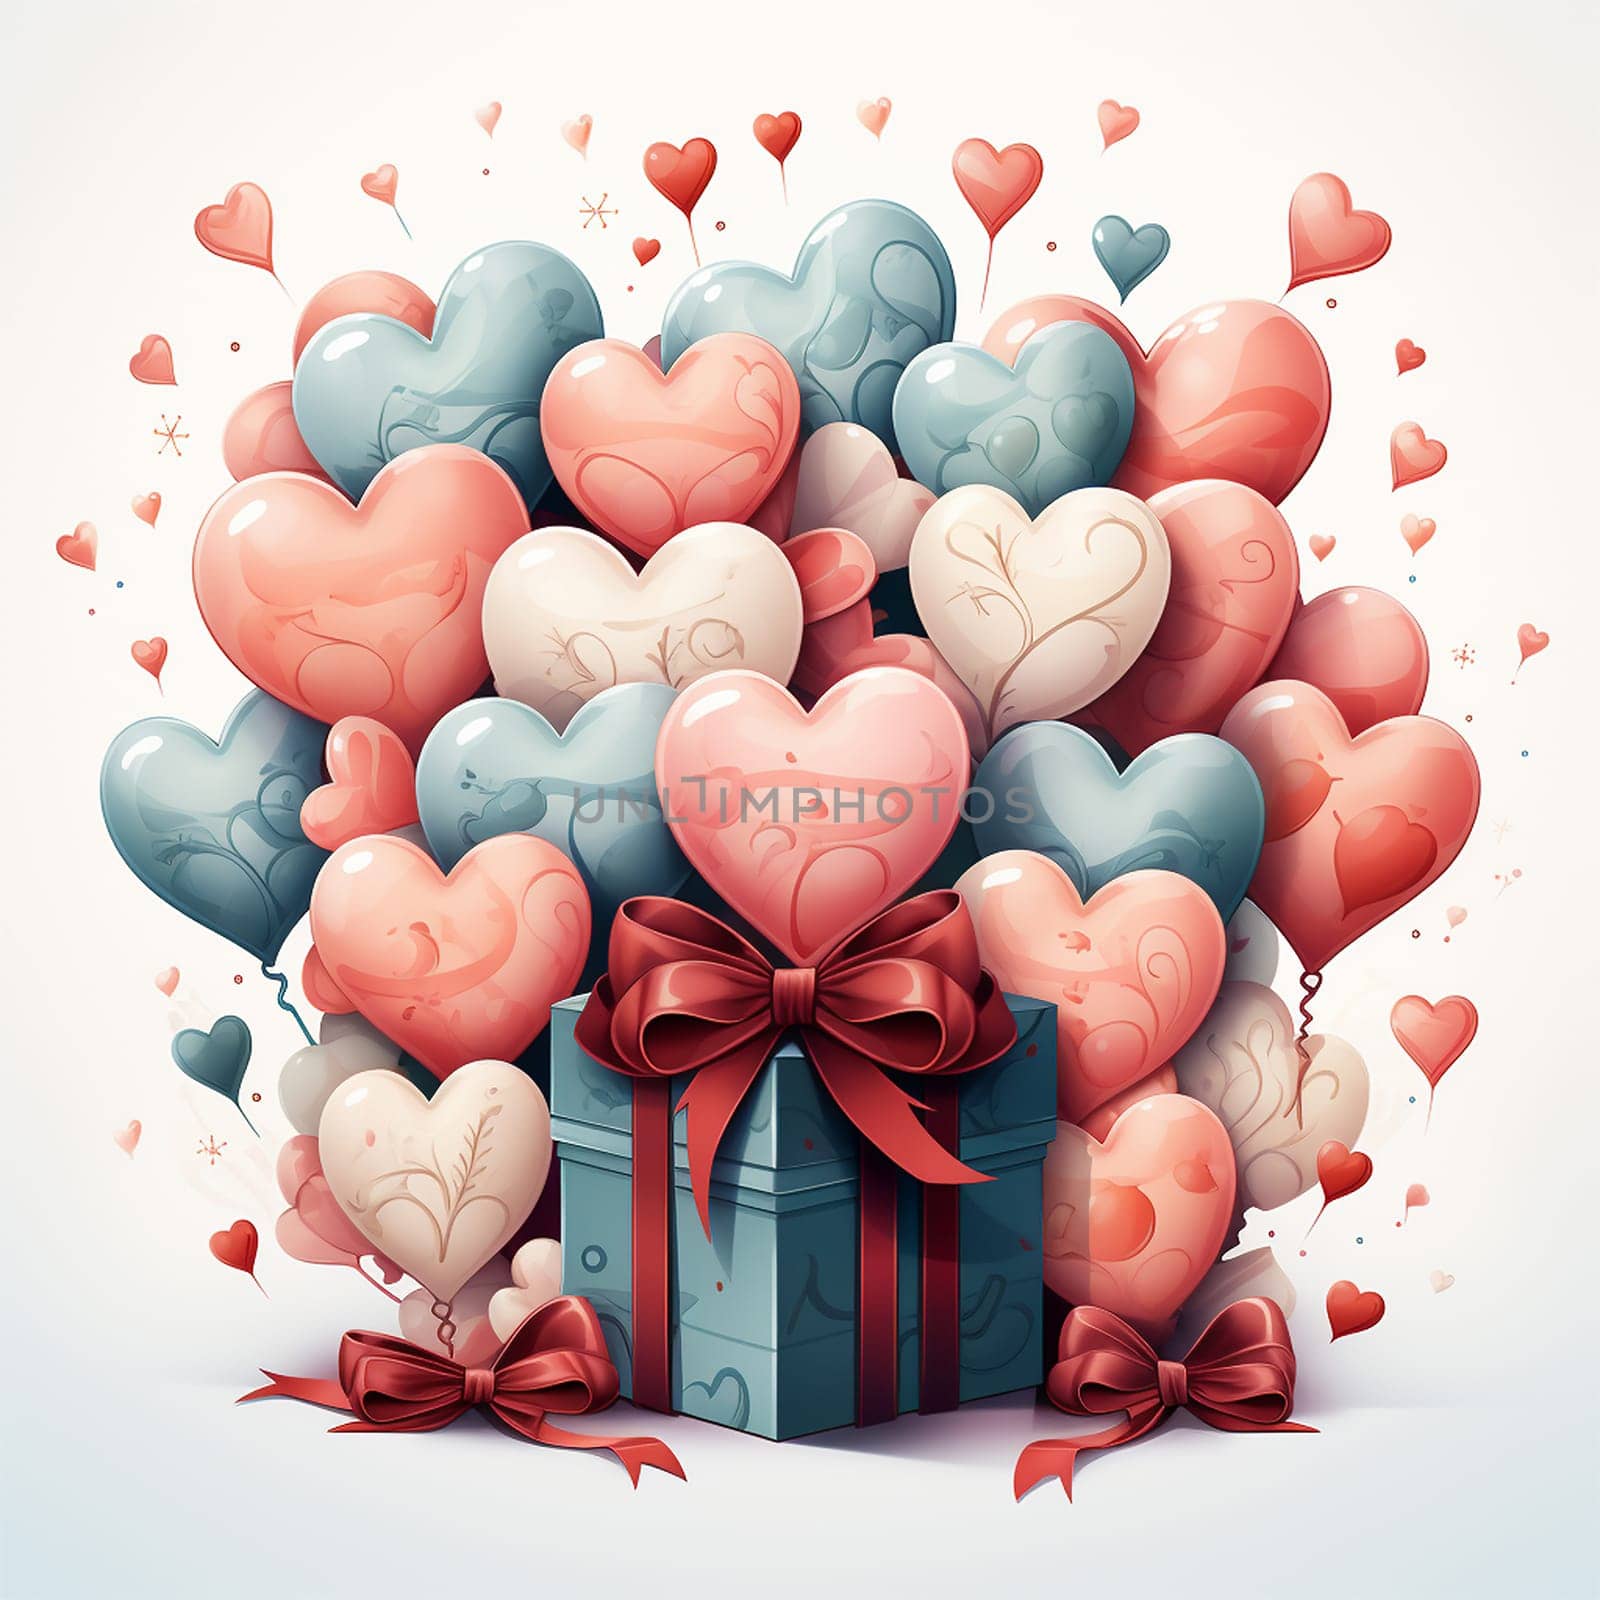 Valentine's day design. Realistic 3d pink gifts boxes. Open gift box full of decorative festive object. Holiday banner, web poster, flyer, stylish brochure, greeting card, cover. Romantic background Valentine's Day concept Copy space